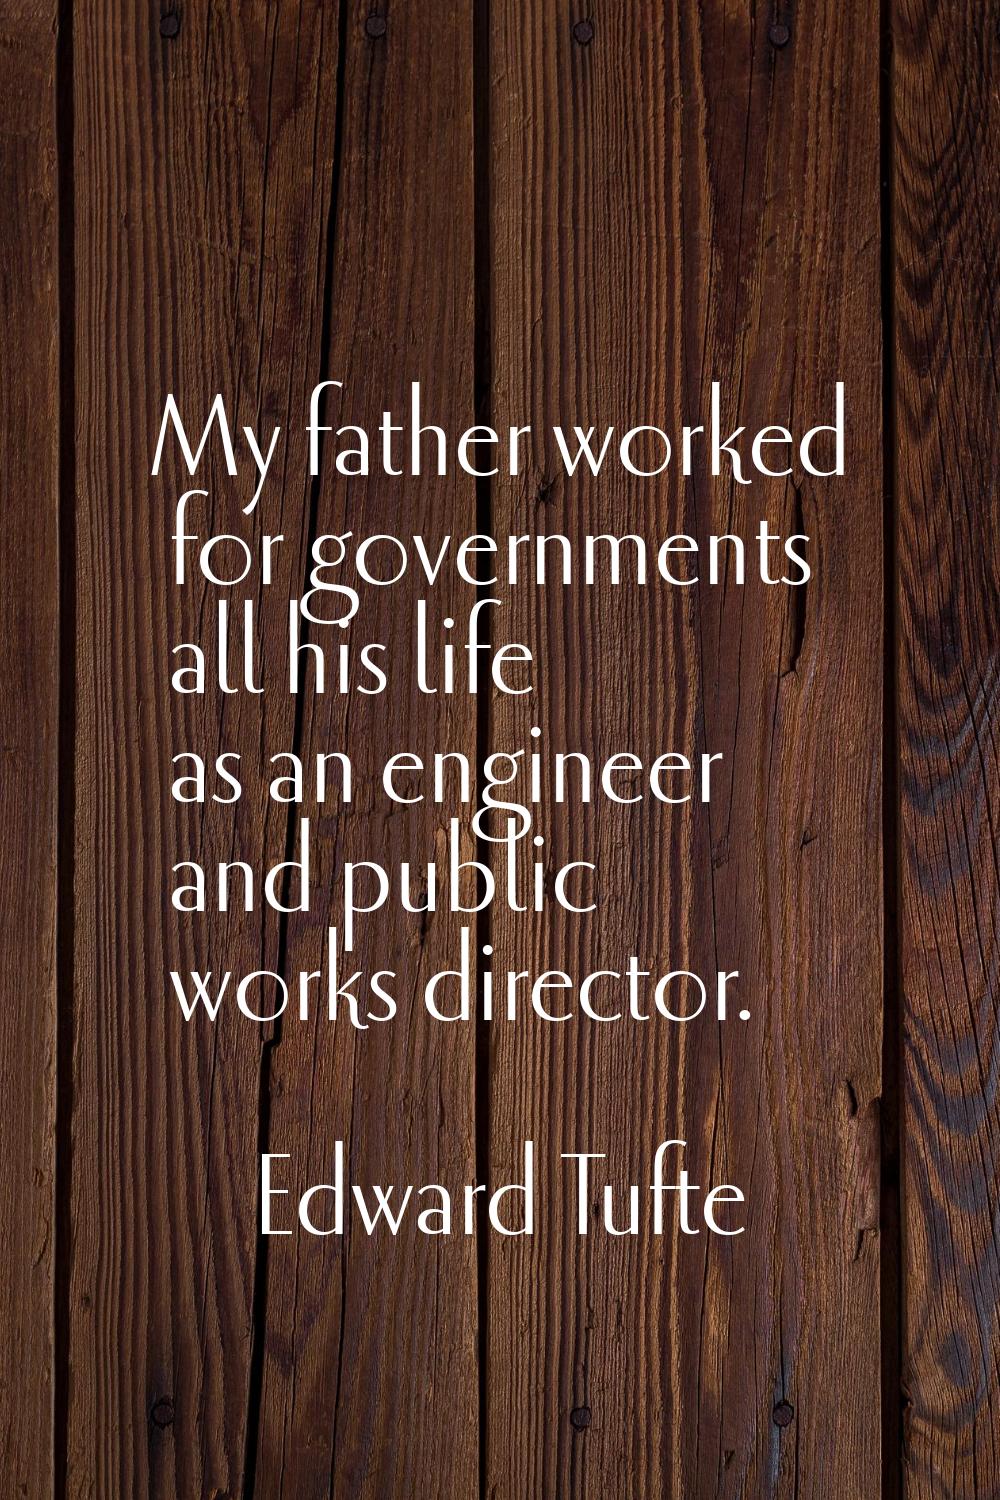 My father worked for governments all his life as an engineer and public works director.